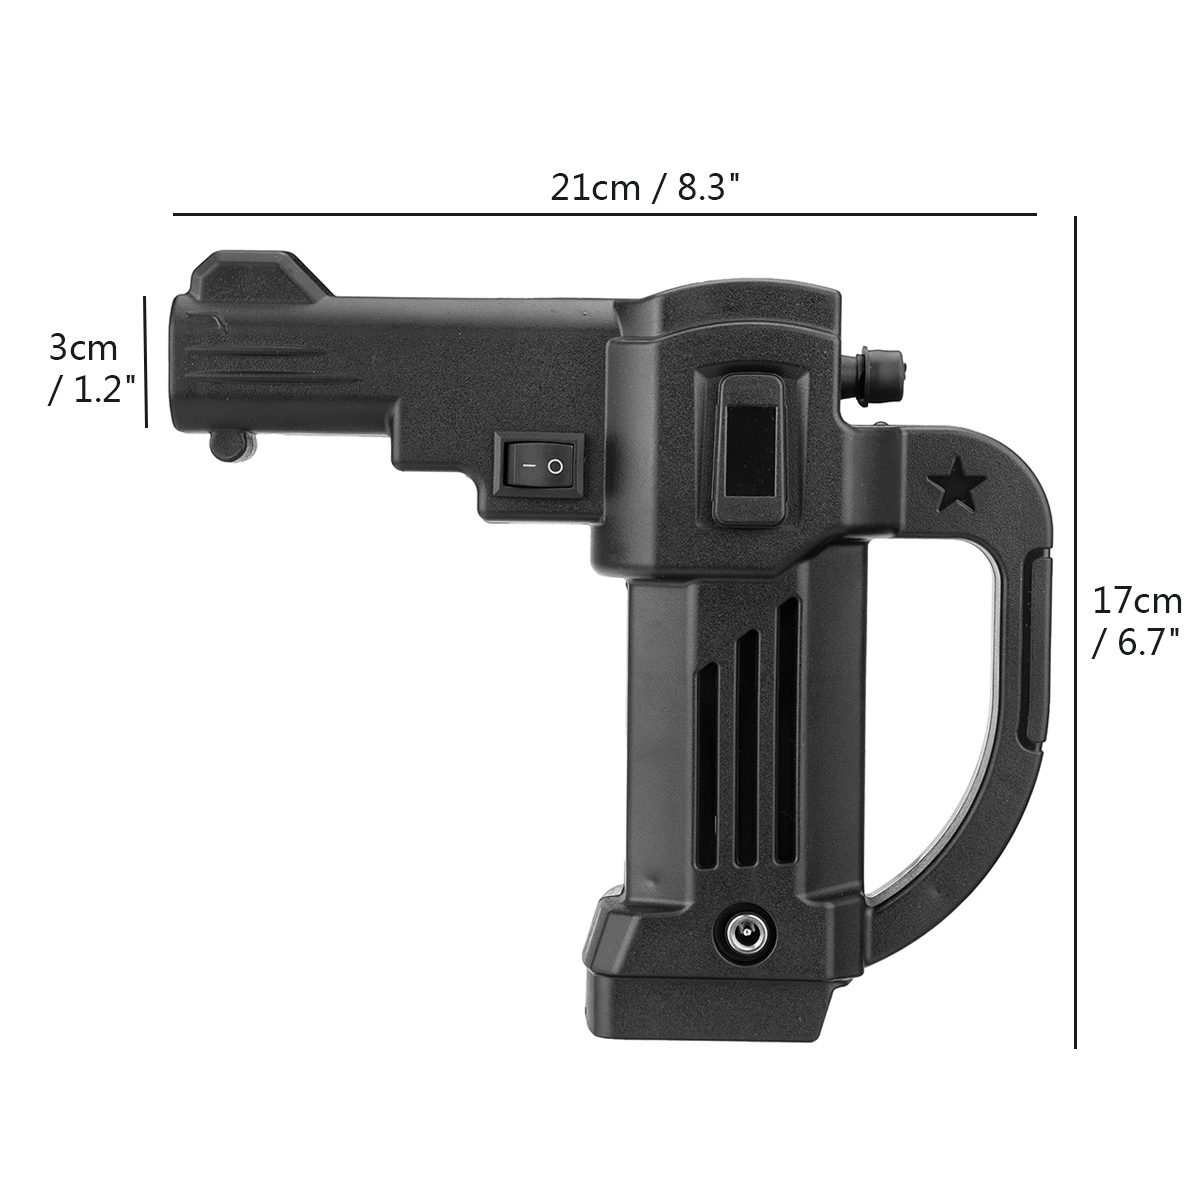 Rechargable-High-Pressure-Car-Washer-Cleaning-Wand-Nozzle-Spray-Guns-Flow-Controls-Tool-W-Filter-Wat-1837431-9